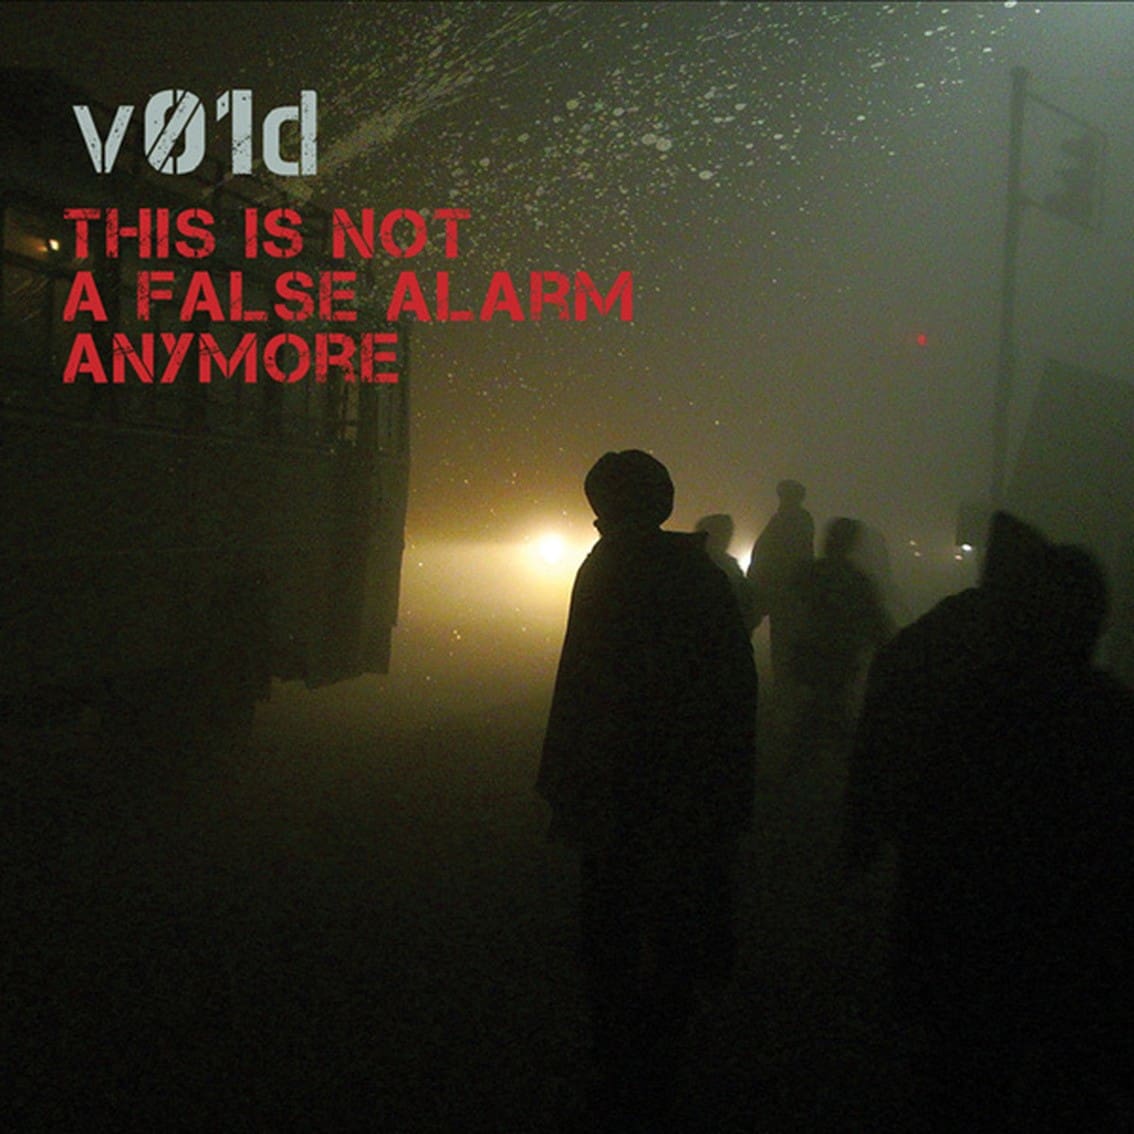 v01d debut LP 'This Is Not A False Alarm Anymore' available again after years of being sold out